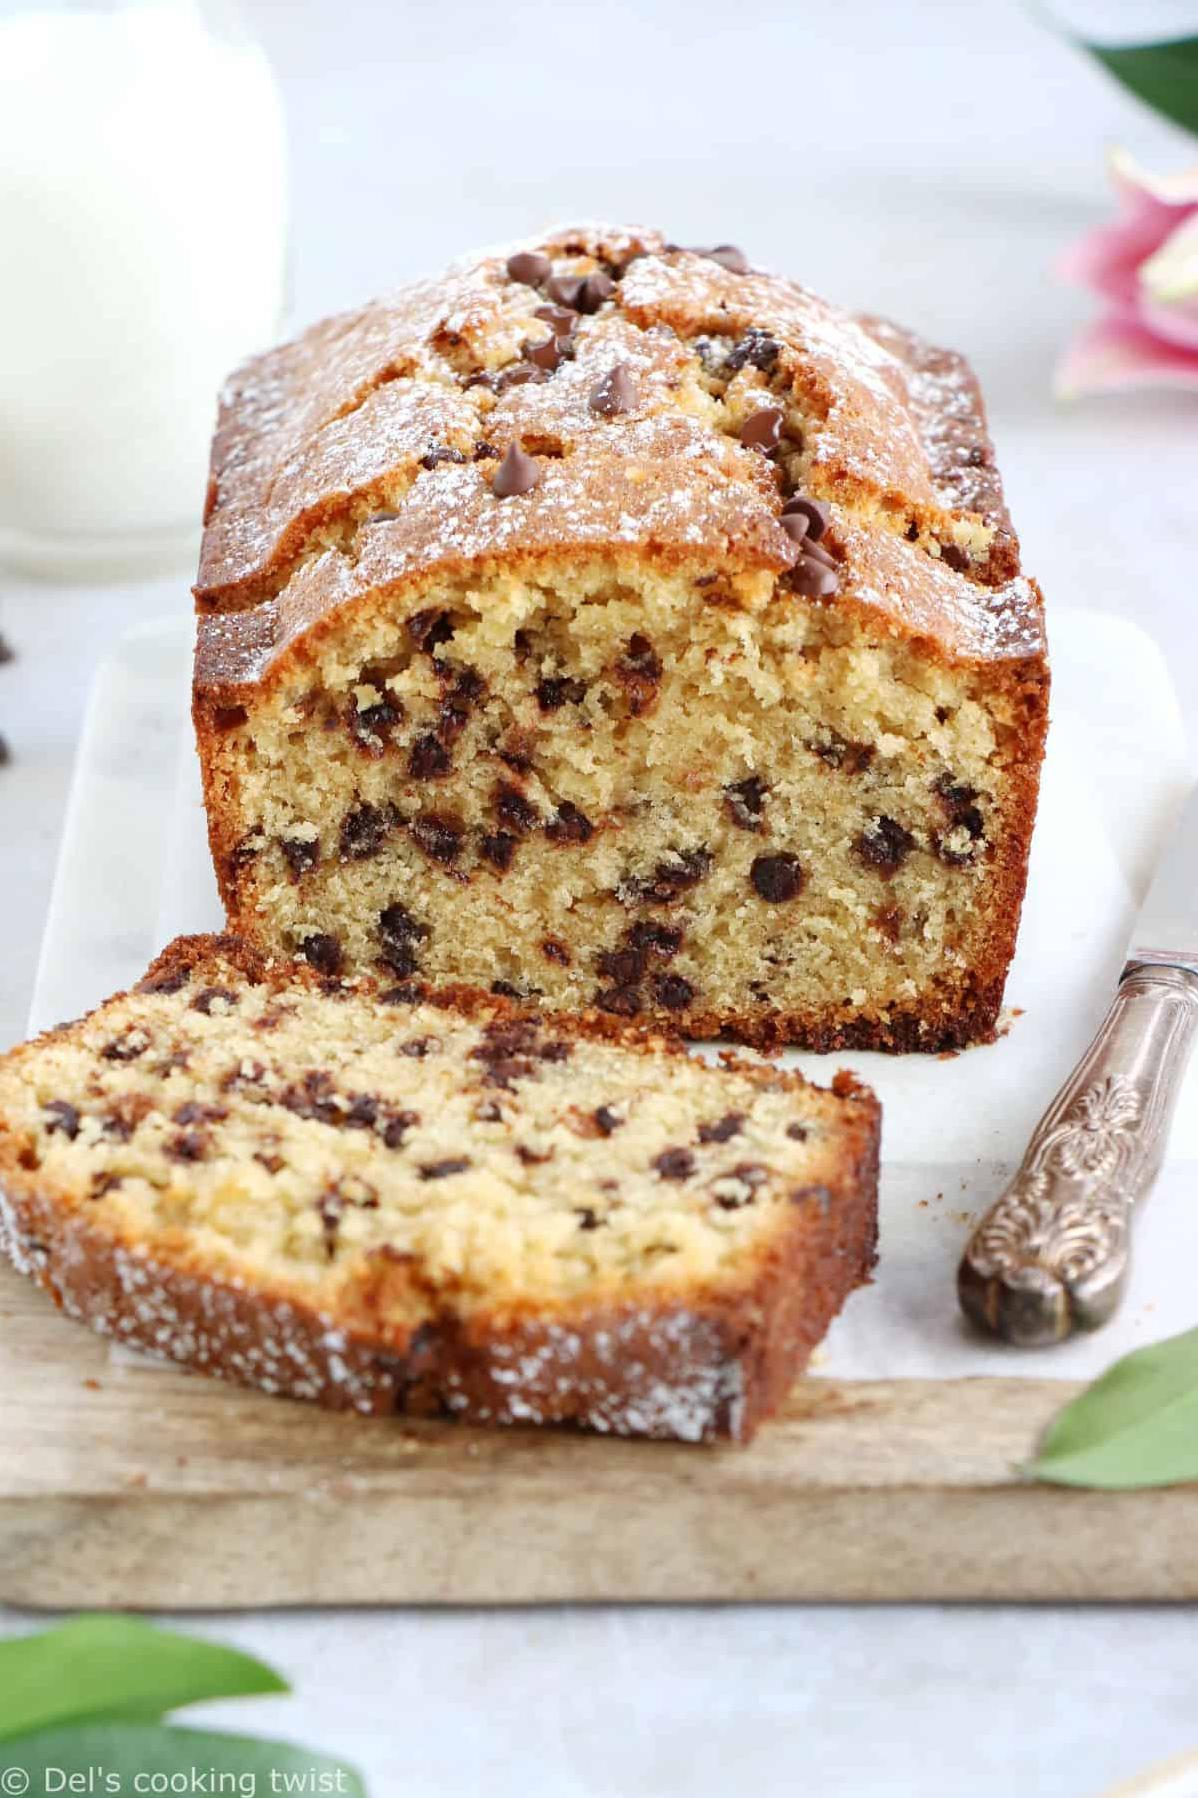  Get ready to indulge in this heavenly pound cake that's loaded with chocolate chips and fudgy goodness.